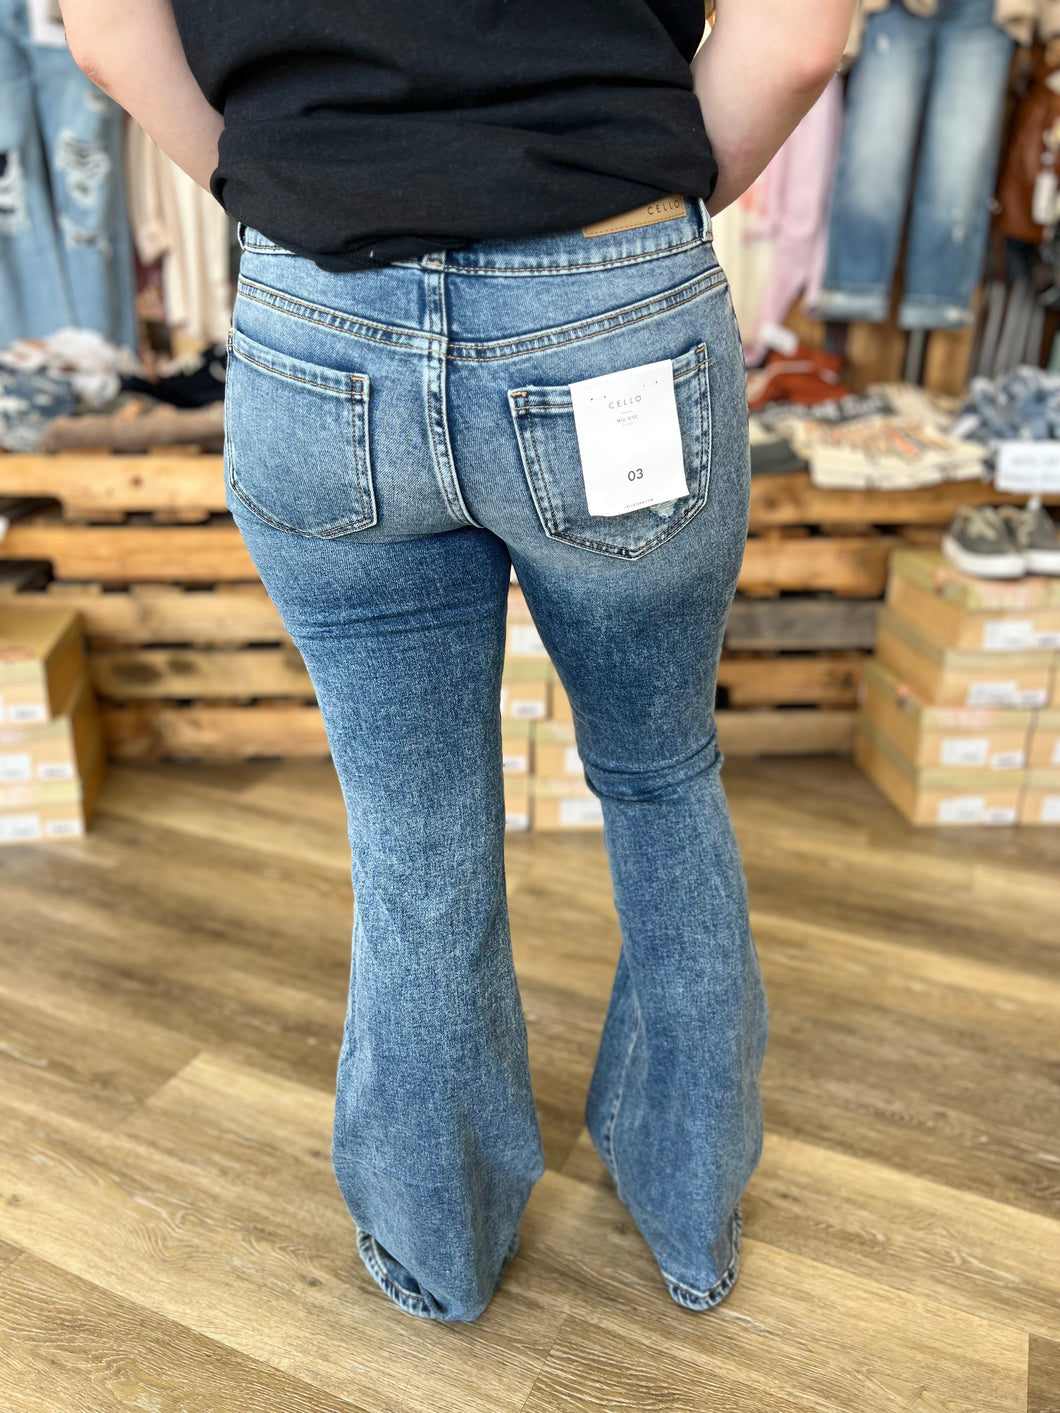 The New Flare Jeans